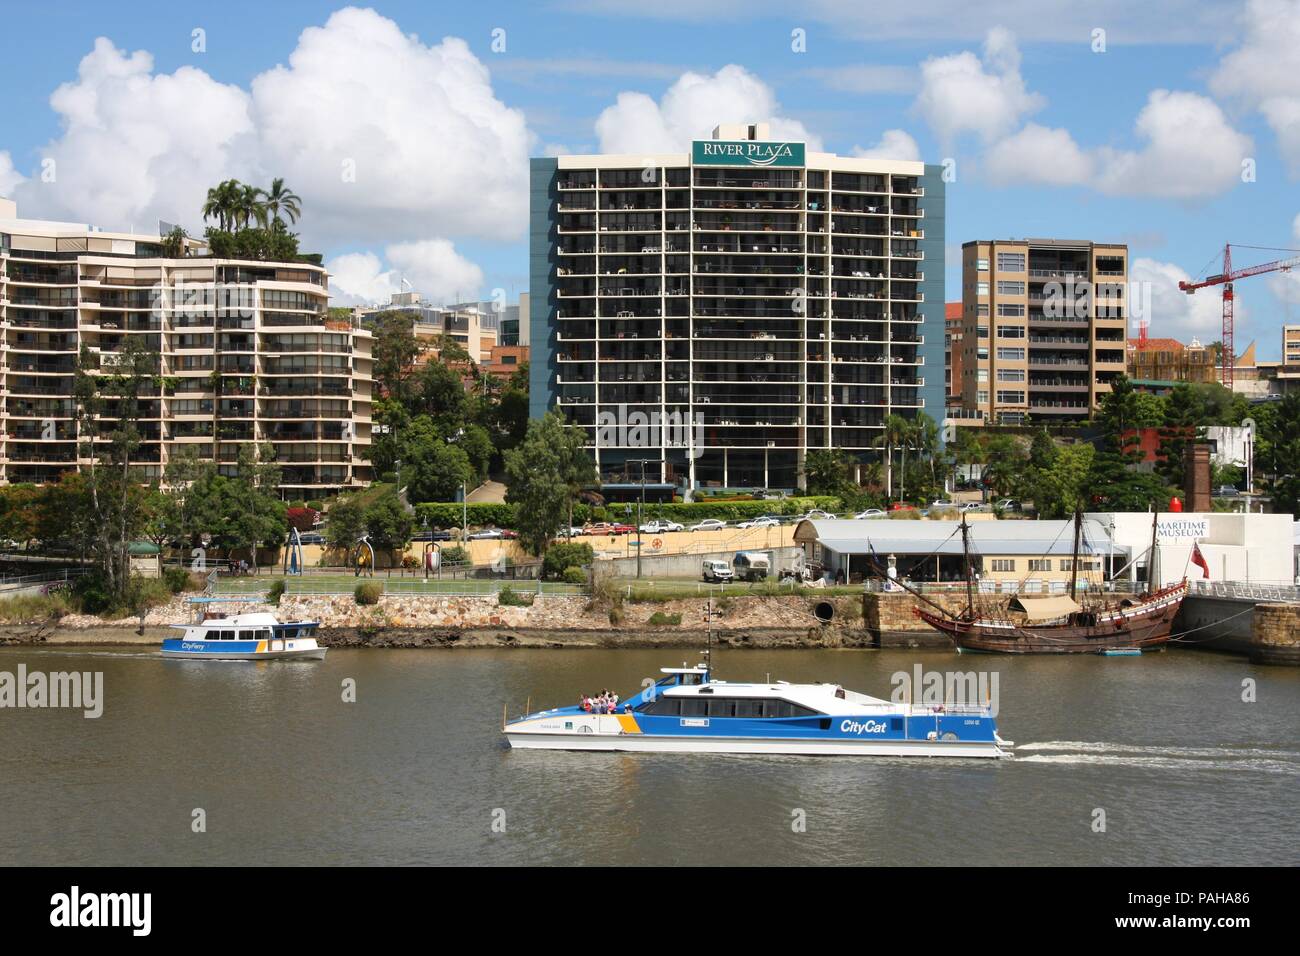 BRISBANE, AUSTRALIA - MARCH 19: People ride CityCat ferry on March 19, 2008 in Brisbane, Australia. Ferries are operated by Translink, which served 17 Stock Photo